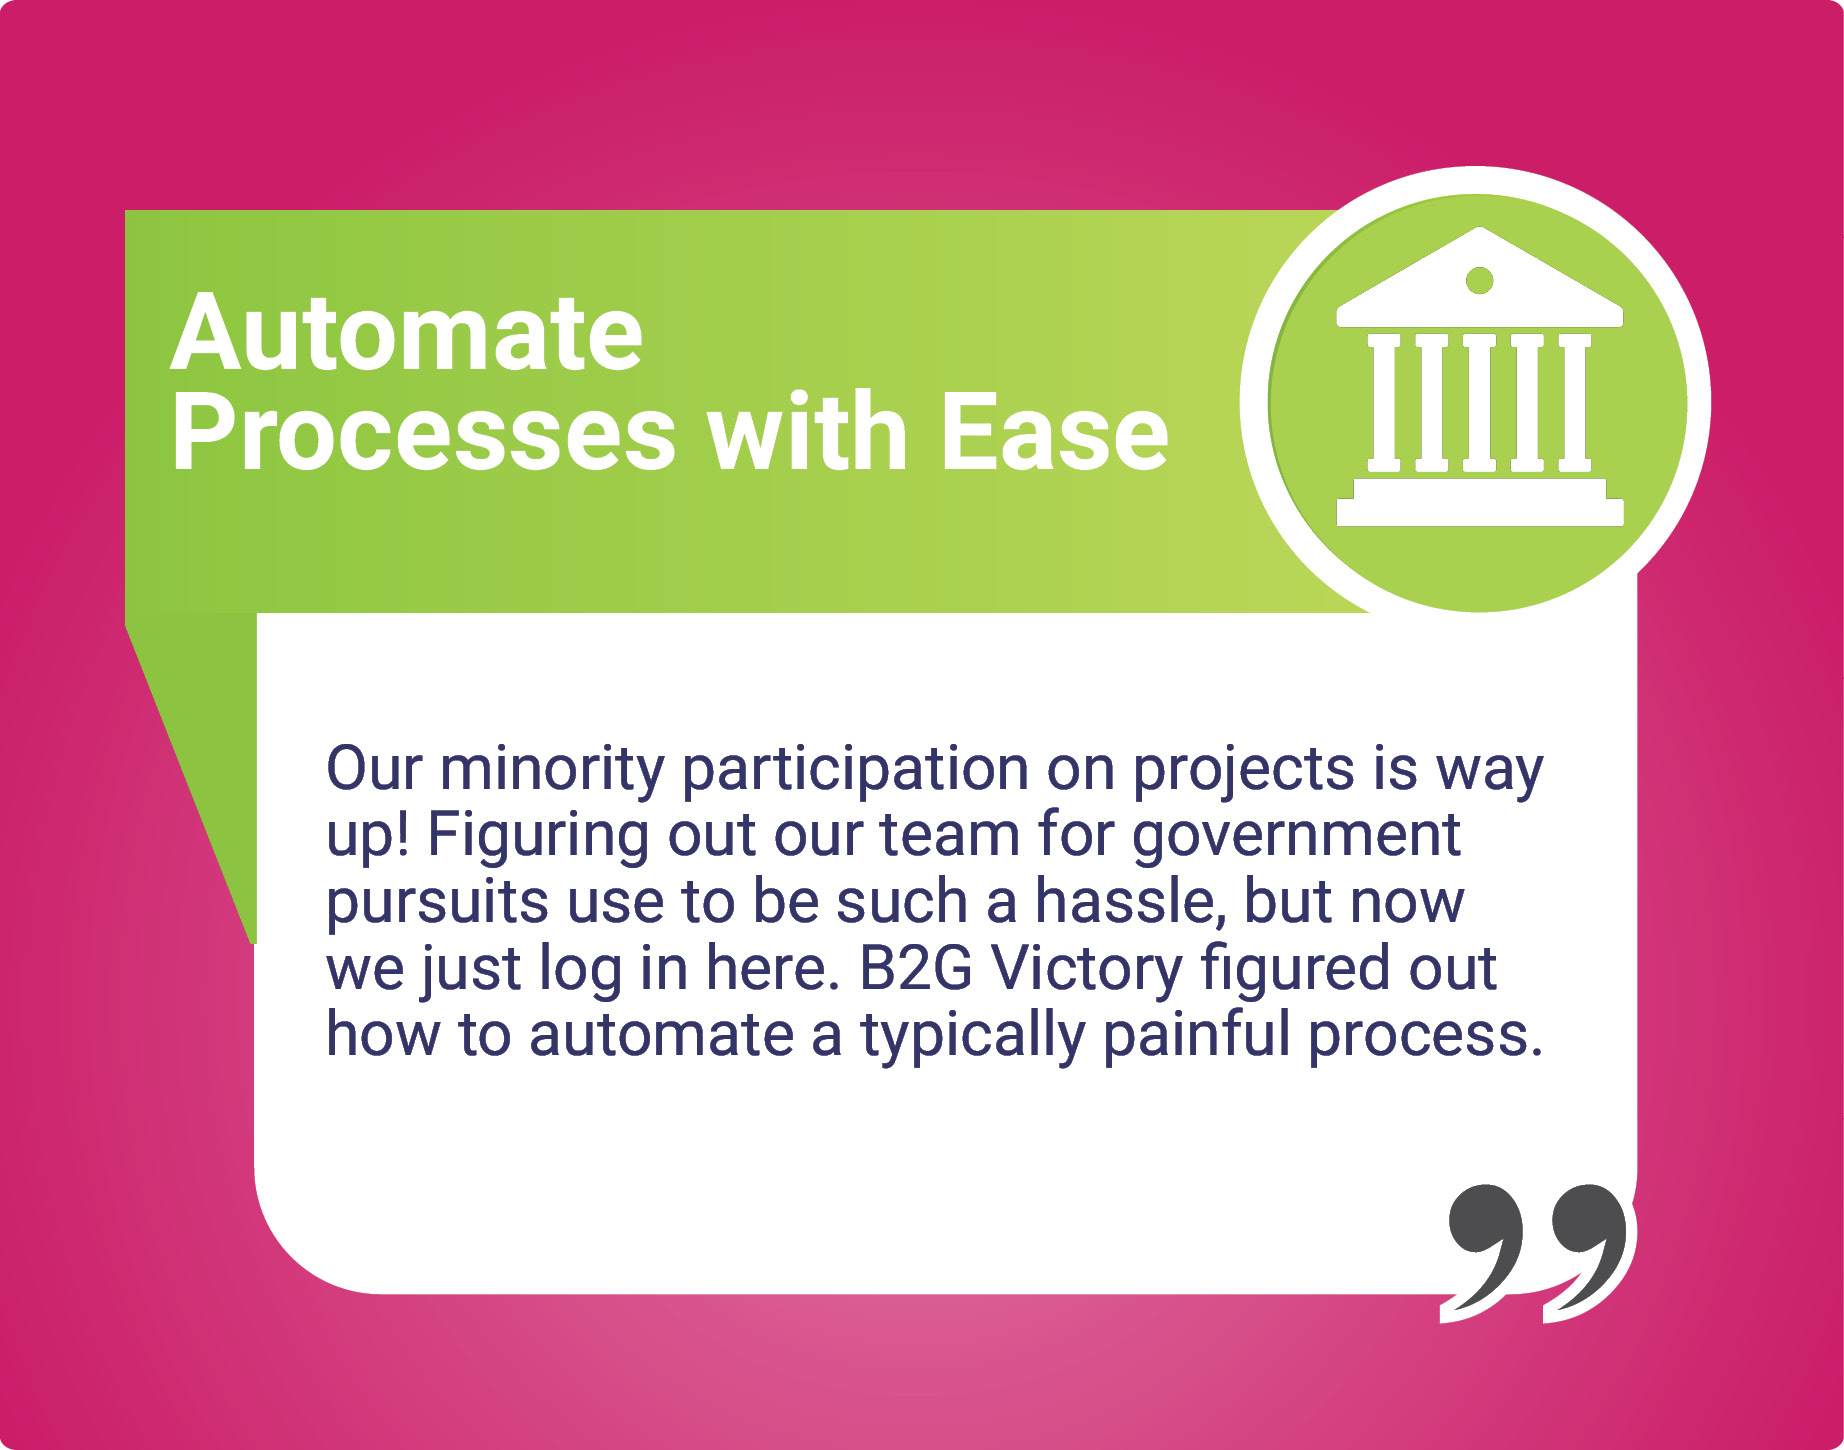 Testimonial for B2G Victory Portal about making automated processes easy